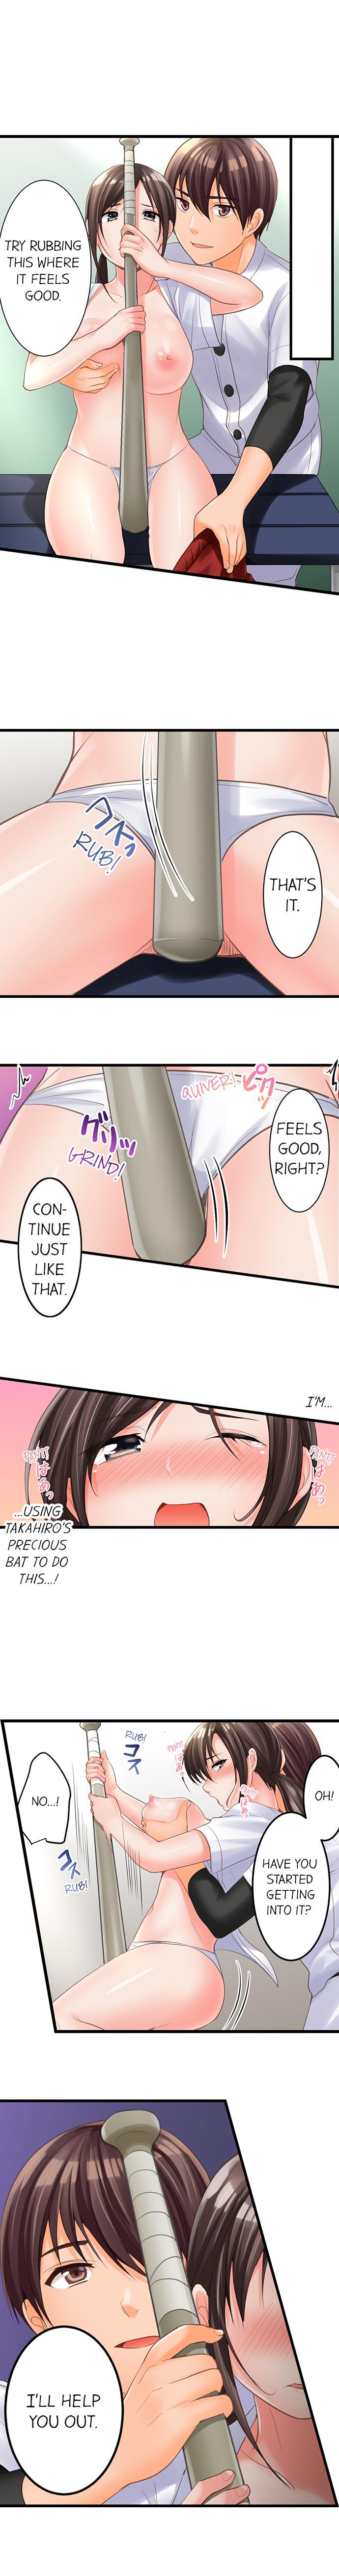 The Day She Became a Sex Toy (Complete] 35